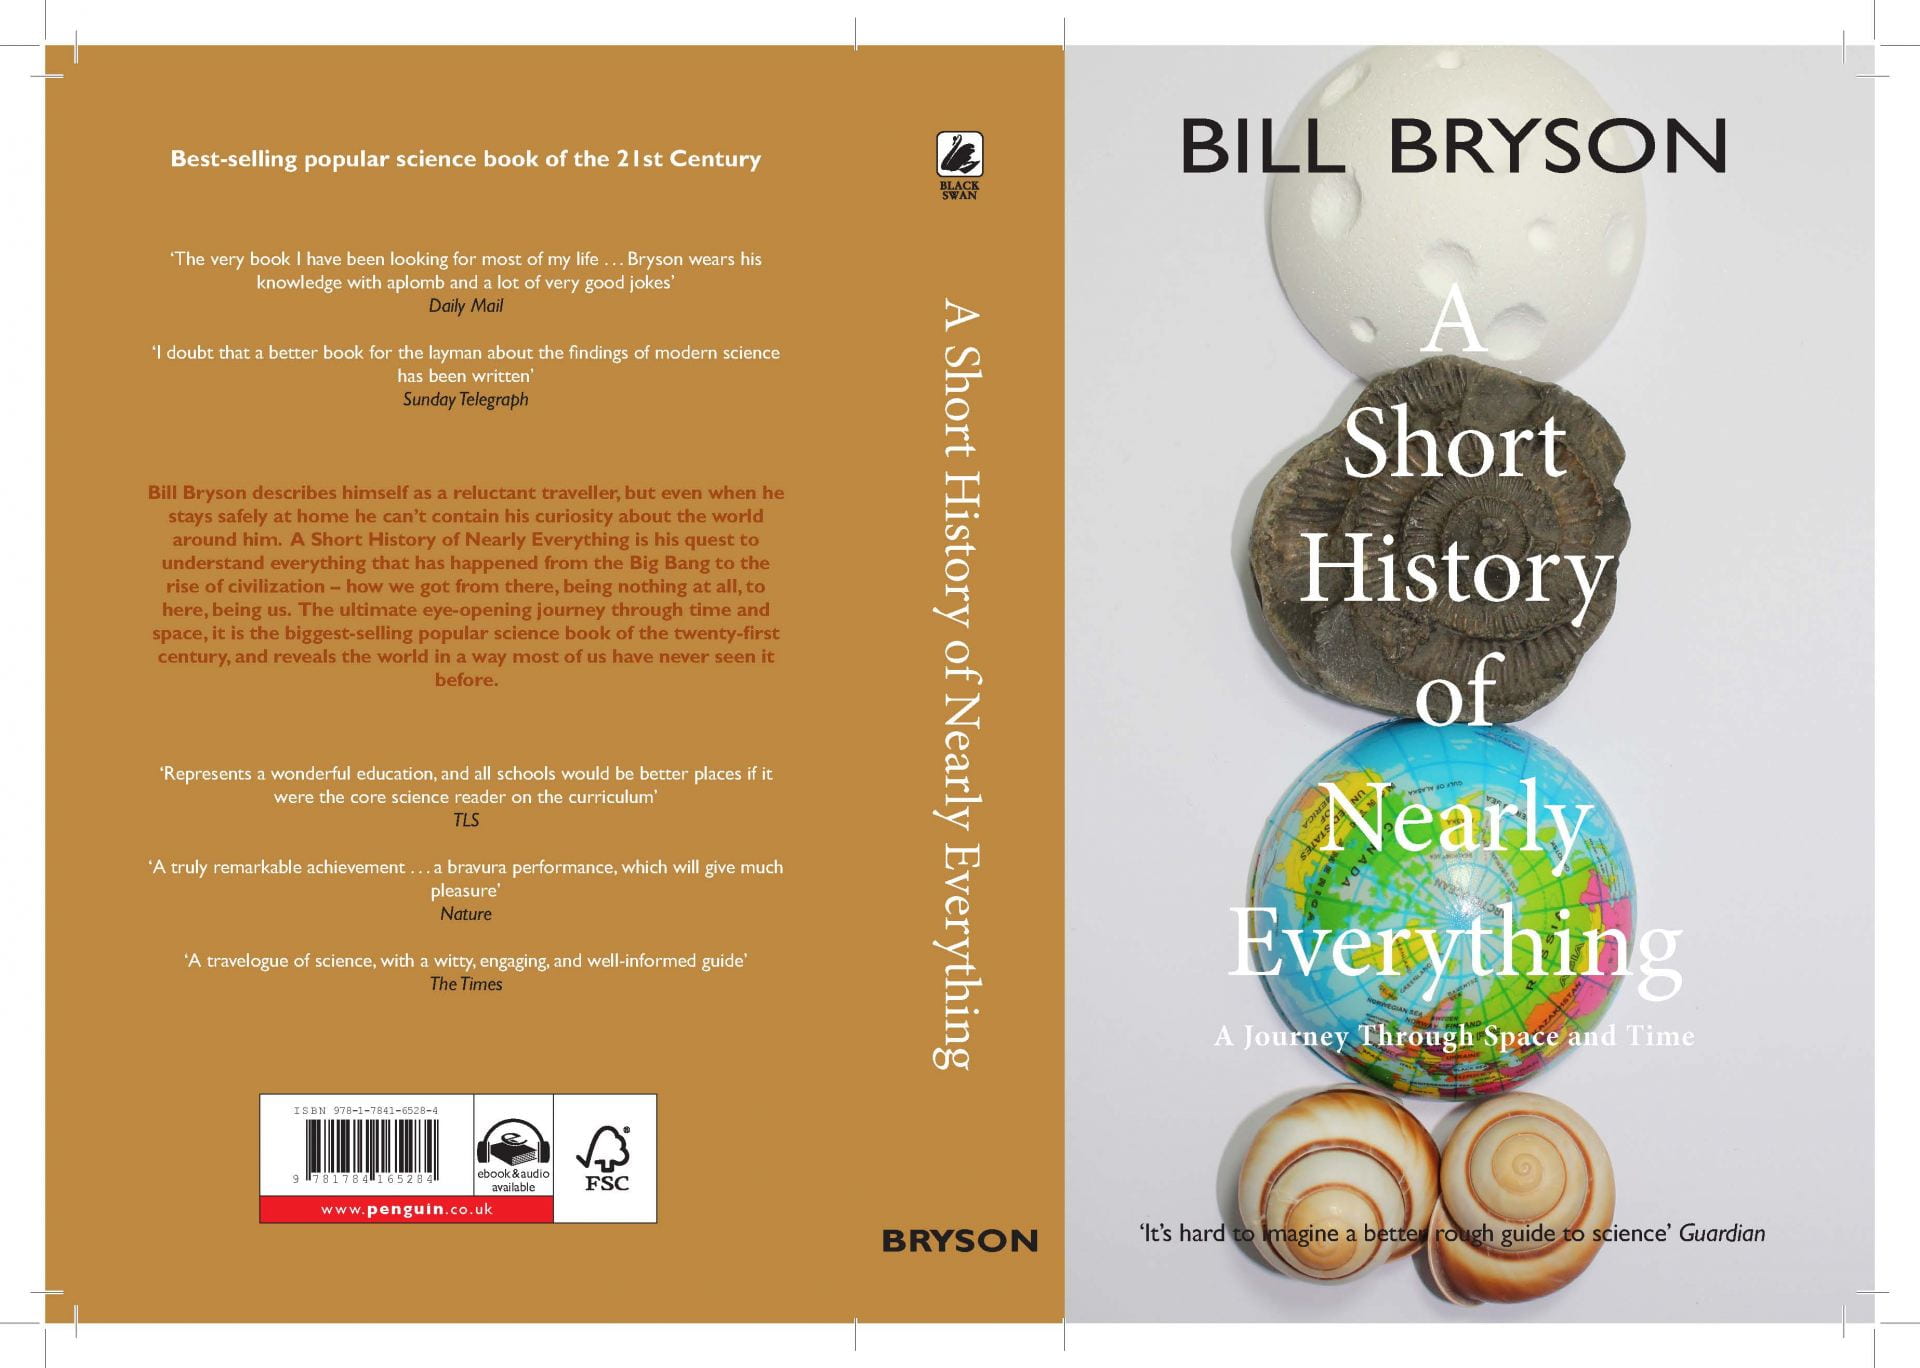 Photographic cover with stacked shells on a globe on Bill Bryson's 'A short history of nearly everything' and back blurb.